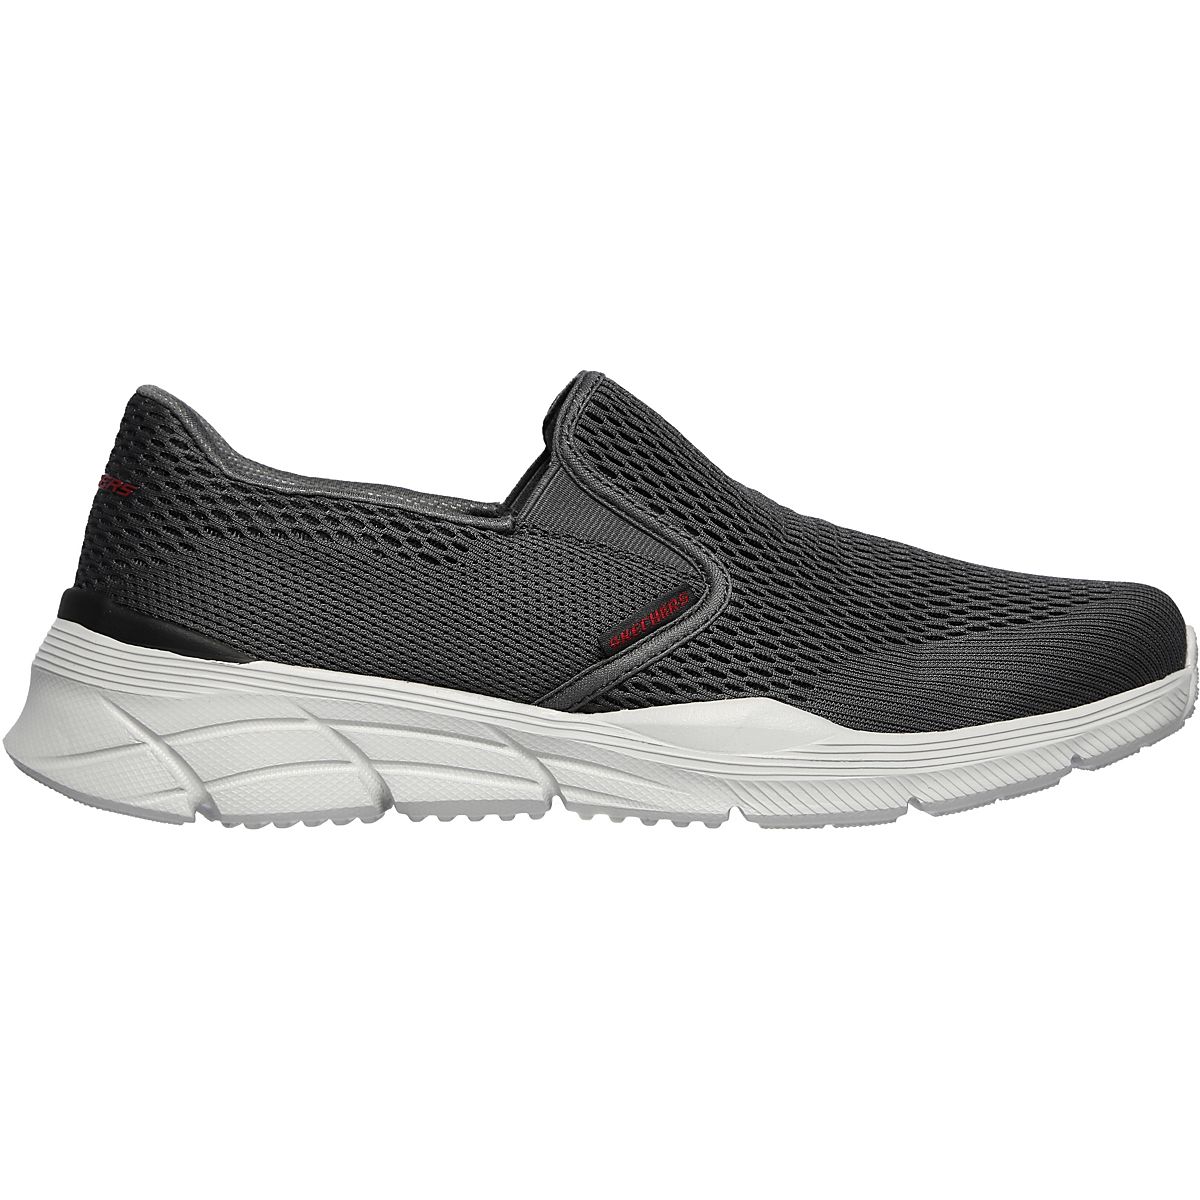 SKECHERS Men's Equalizer 4.0 Persisting Relaxed Fit Slip On Shoes | Academy